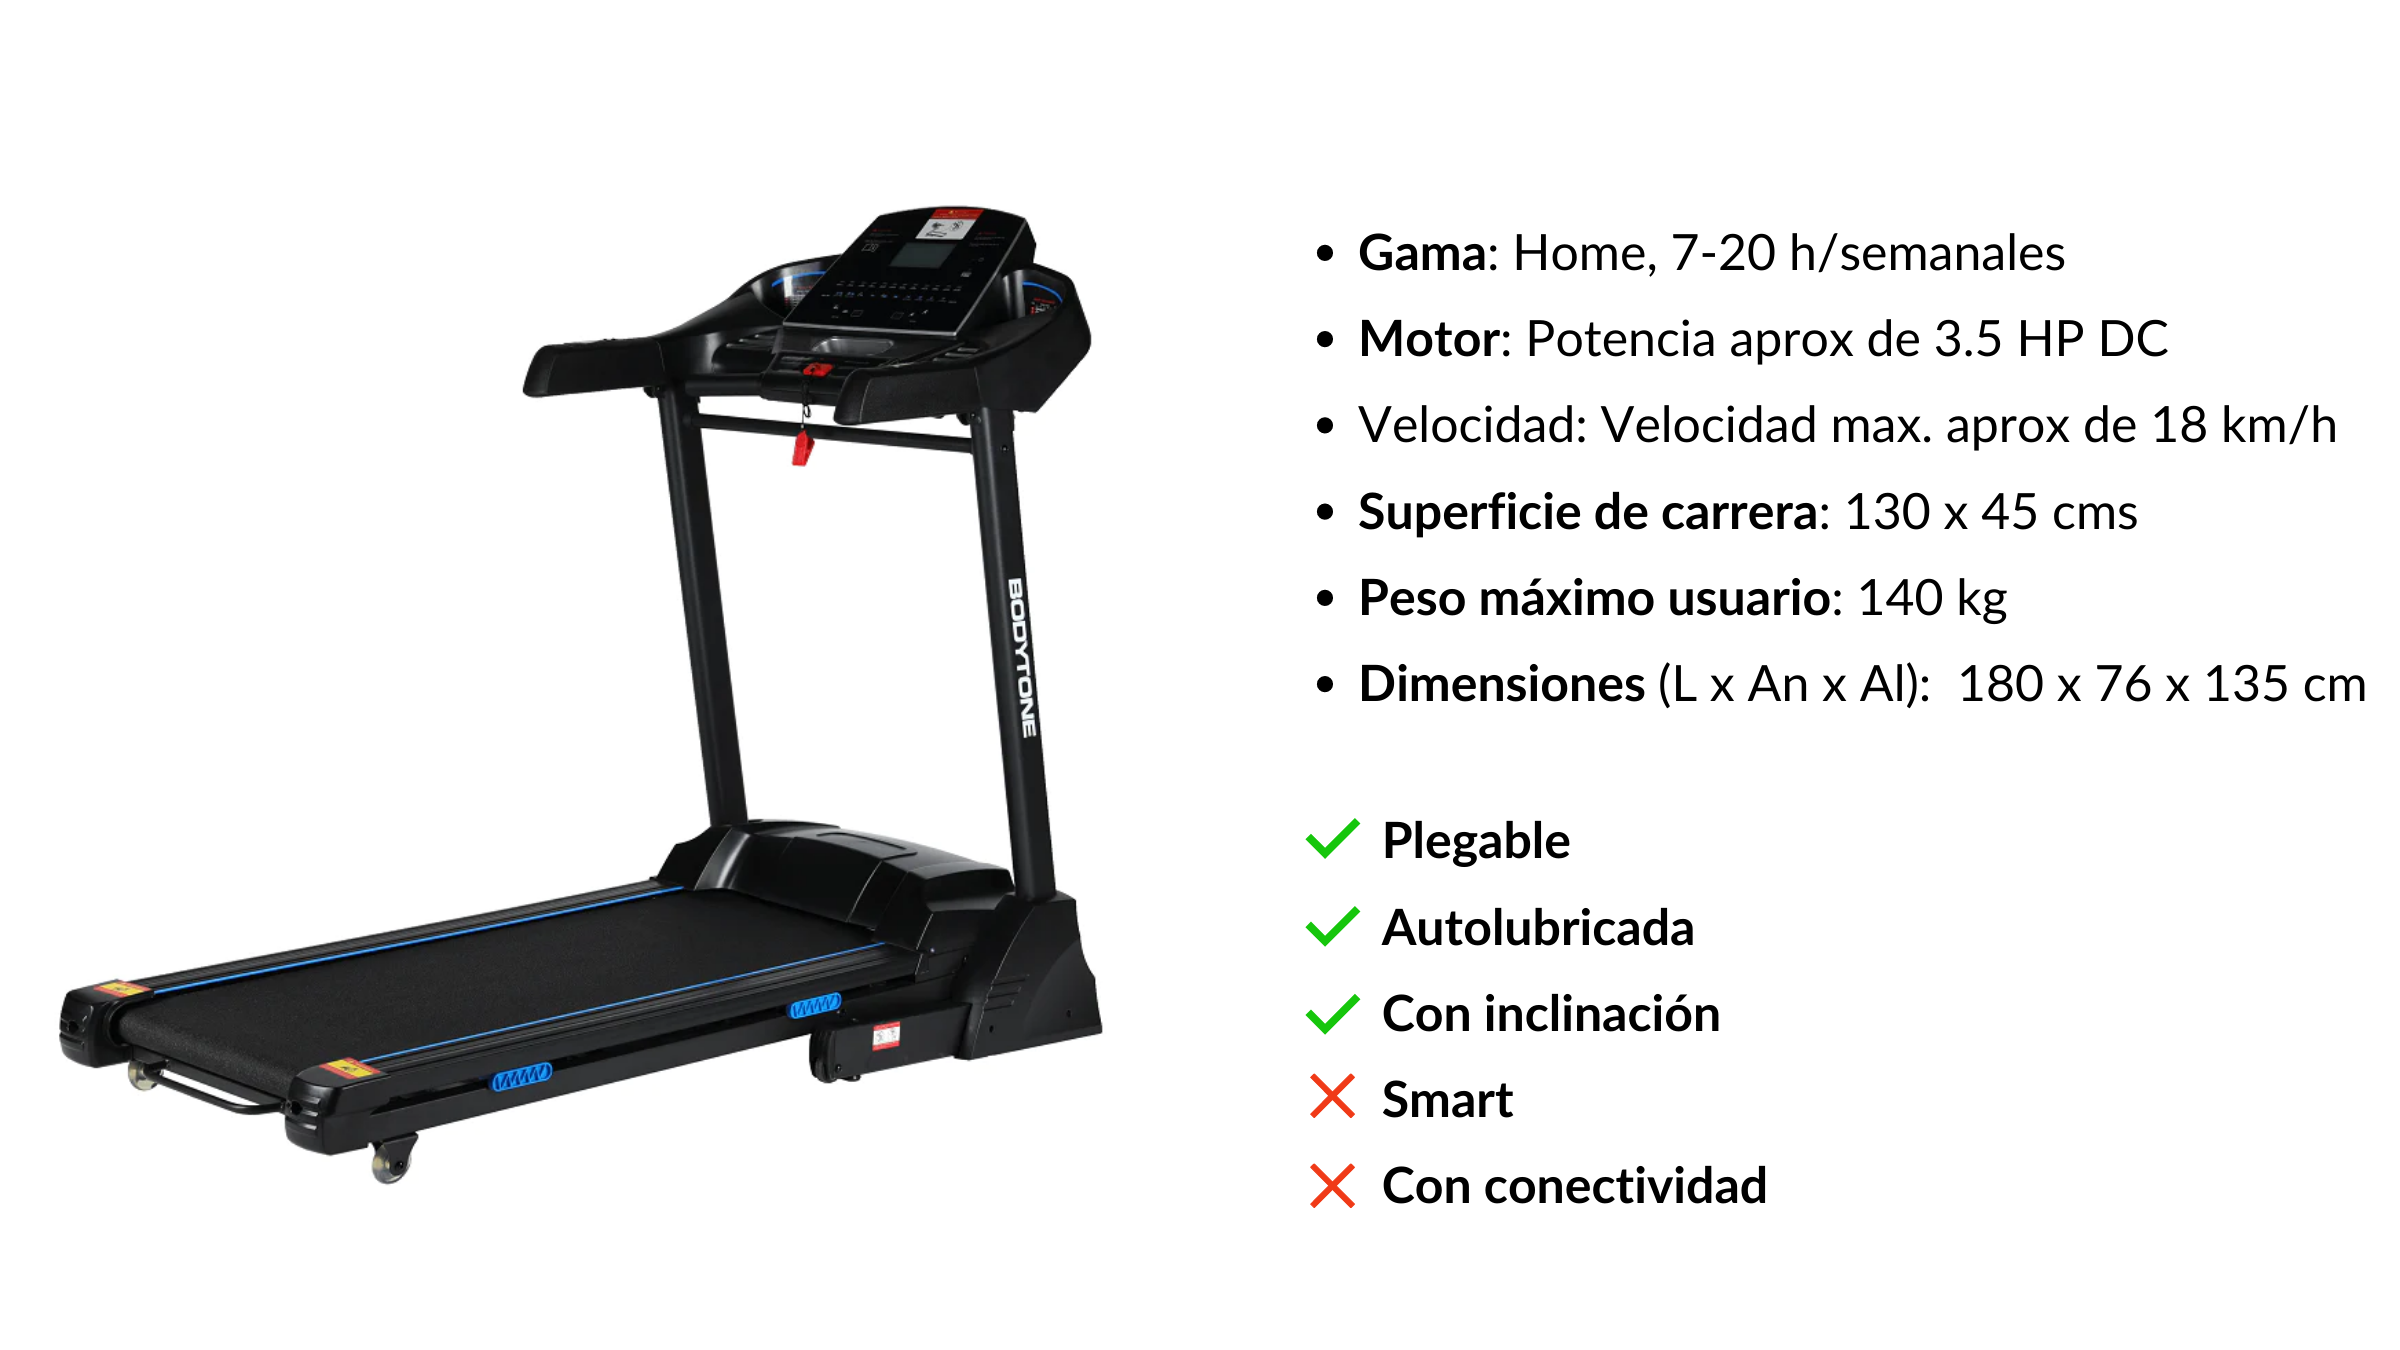 Specifications and features of the Bodytone DT18 Self-Lubricating Treadmill